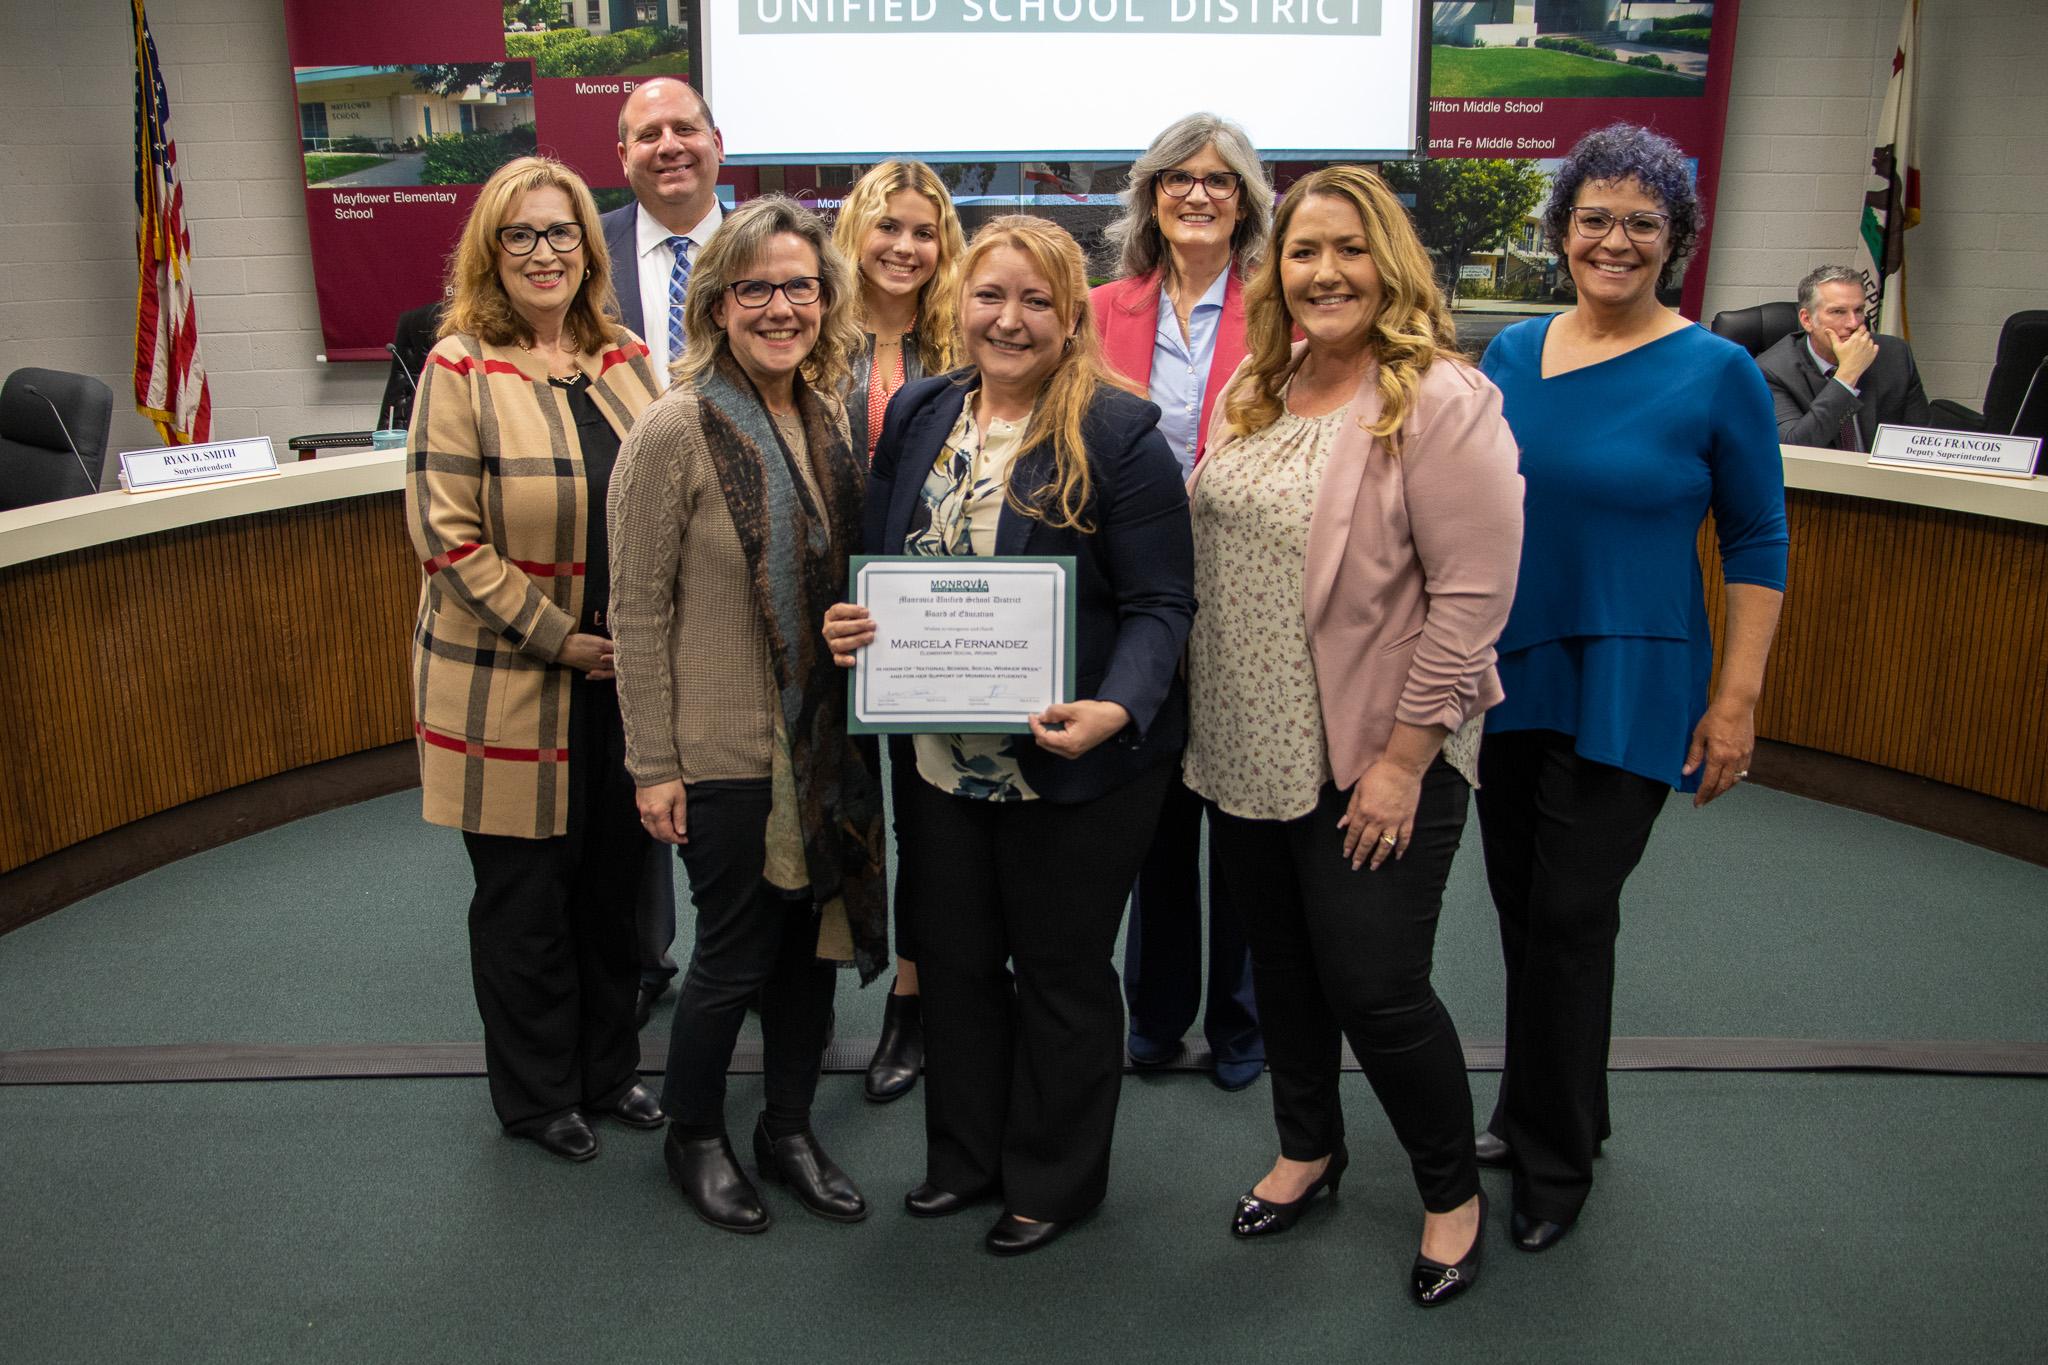 Board Members adopted Resolution No. 2223-16, recognizing March 5-11, 2023, as "National School Social Work Week," celebrating the contribution of school social workers to Monrovia Unified School District students.